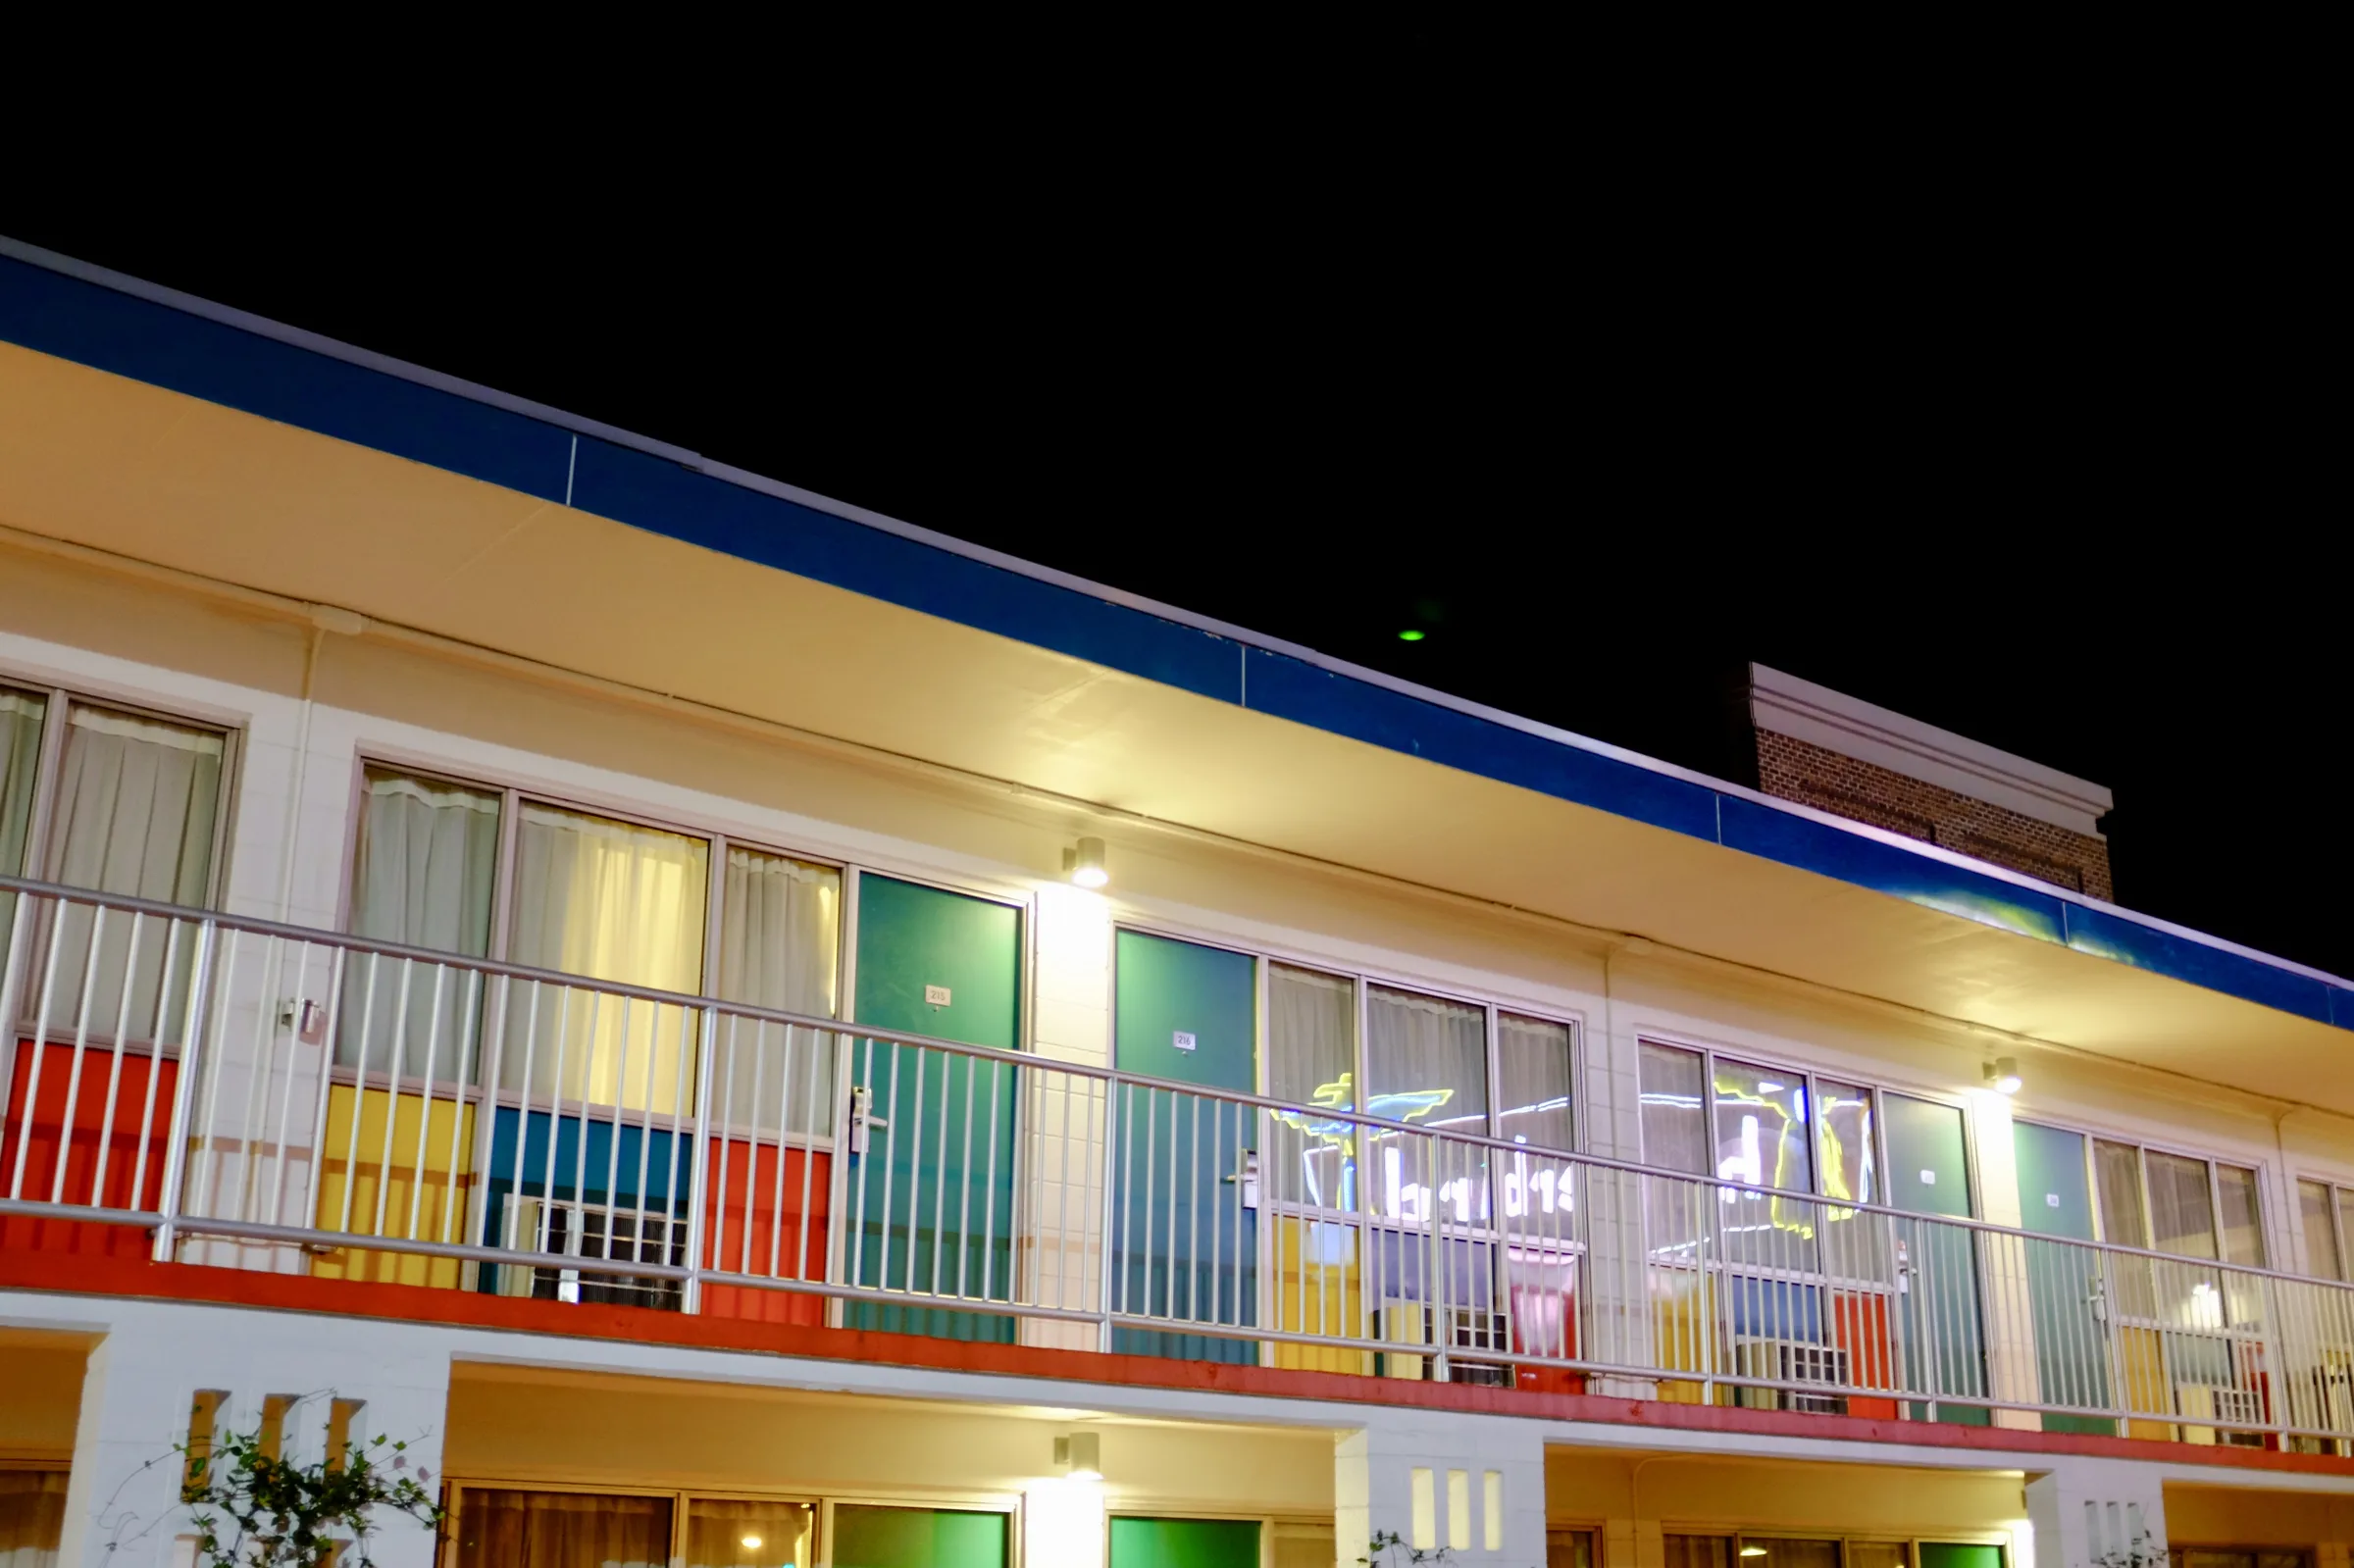 A row of hotel rooms with bright green doors and multicolored panels beneath their windows.